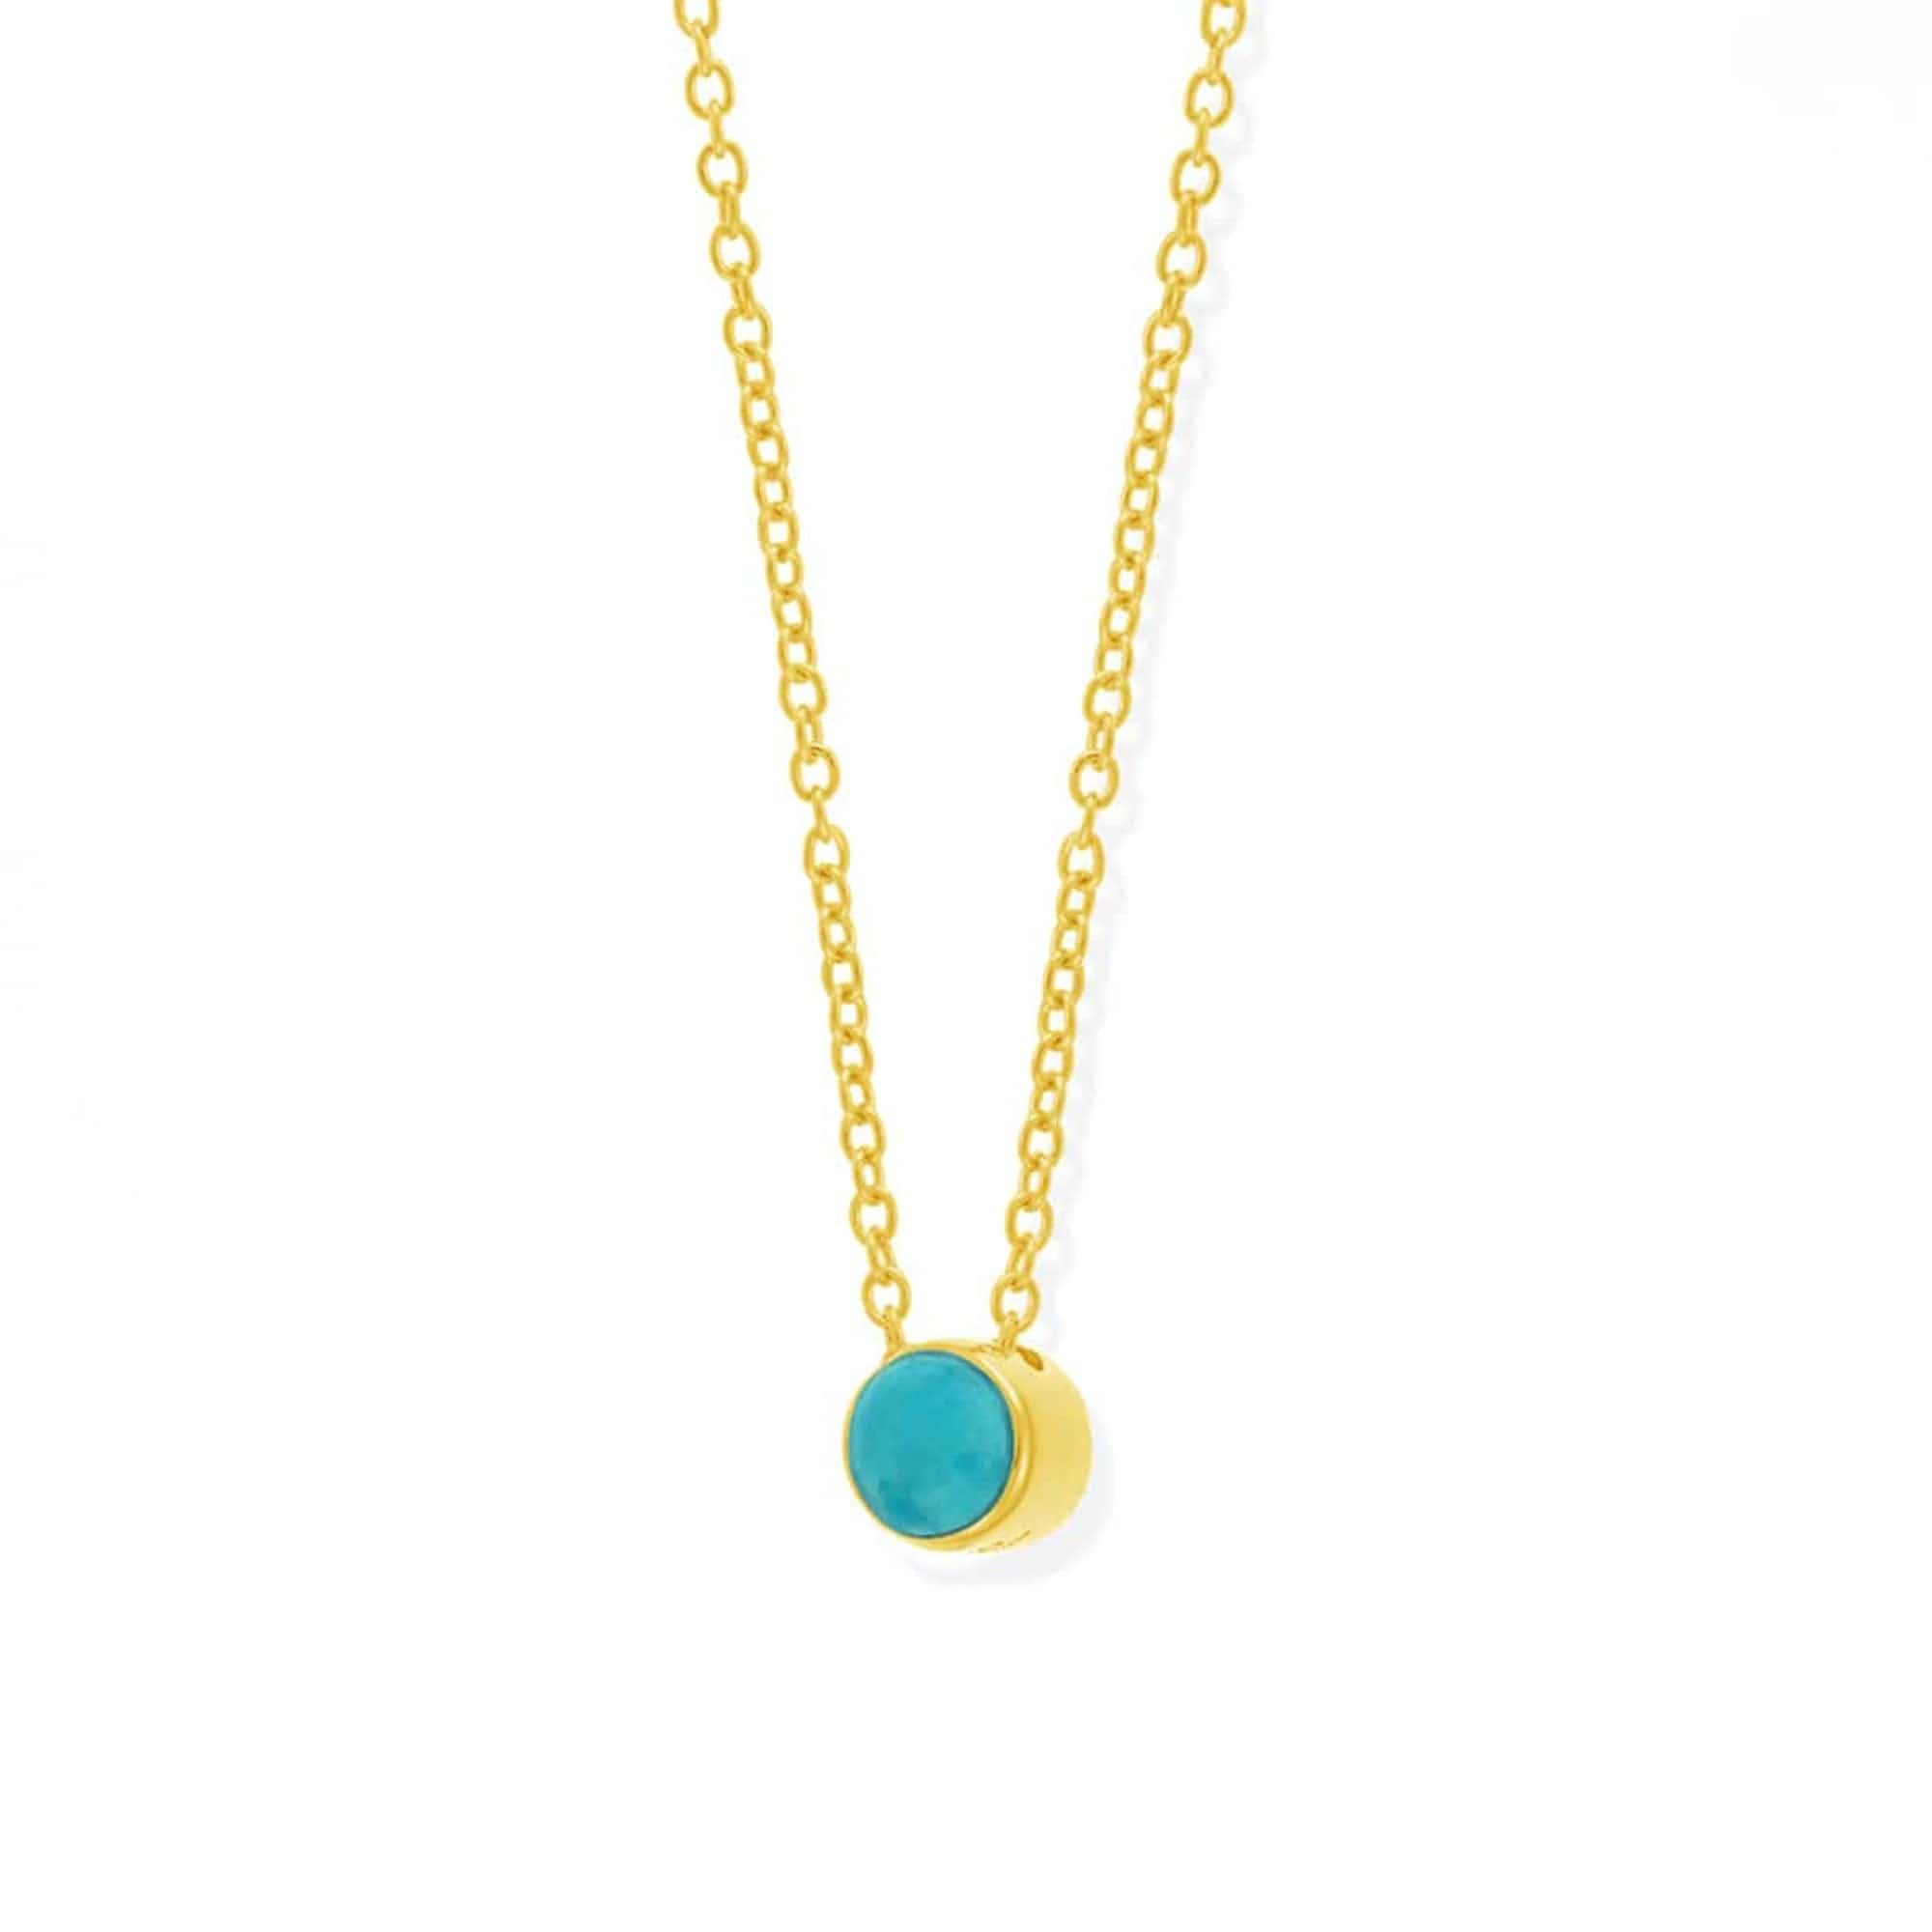 Boma Jewelry Necklaces Belle Dot Pendant Necklace Gold